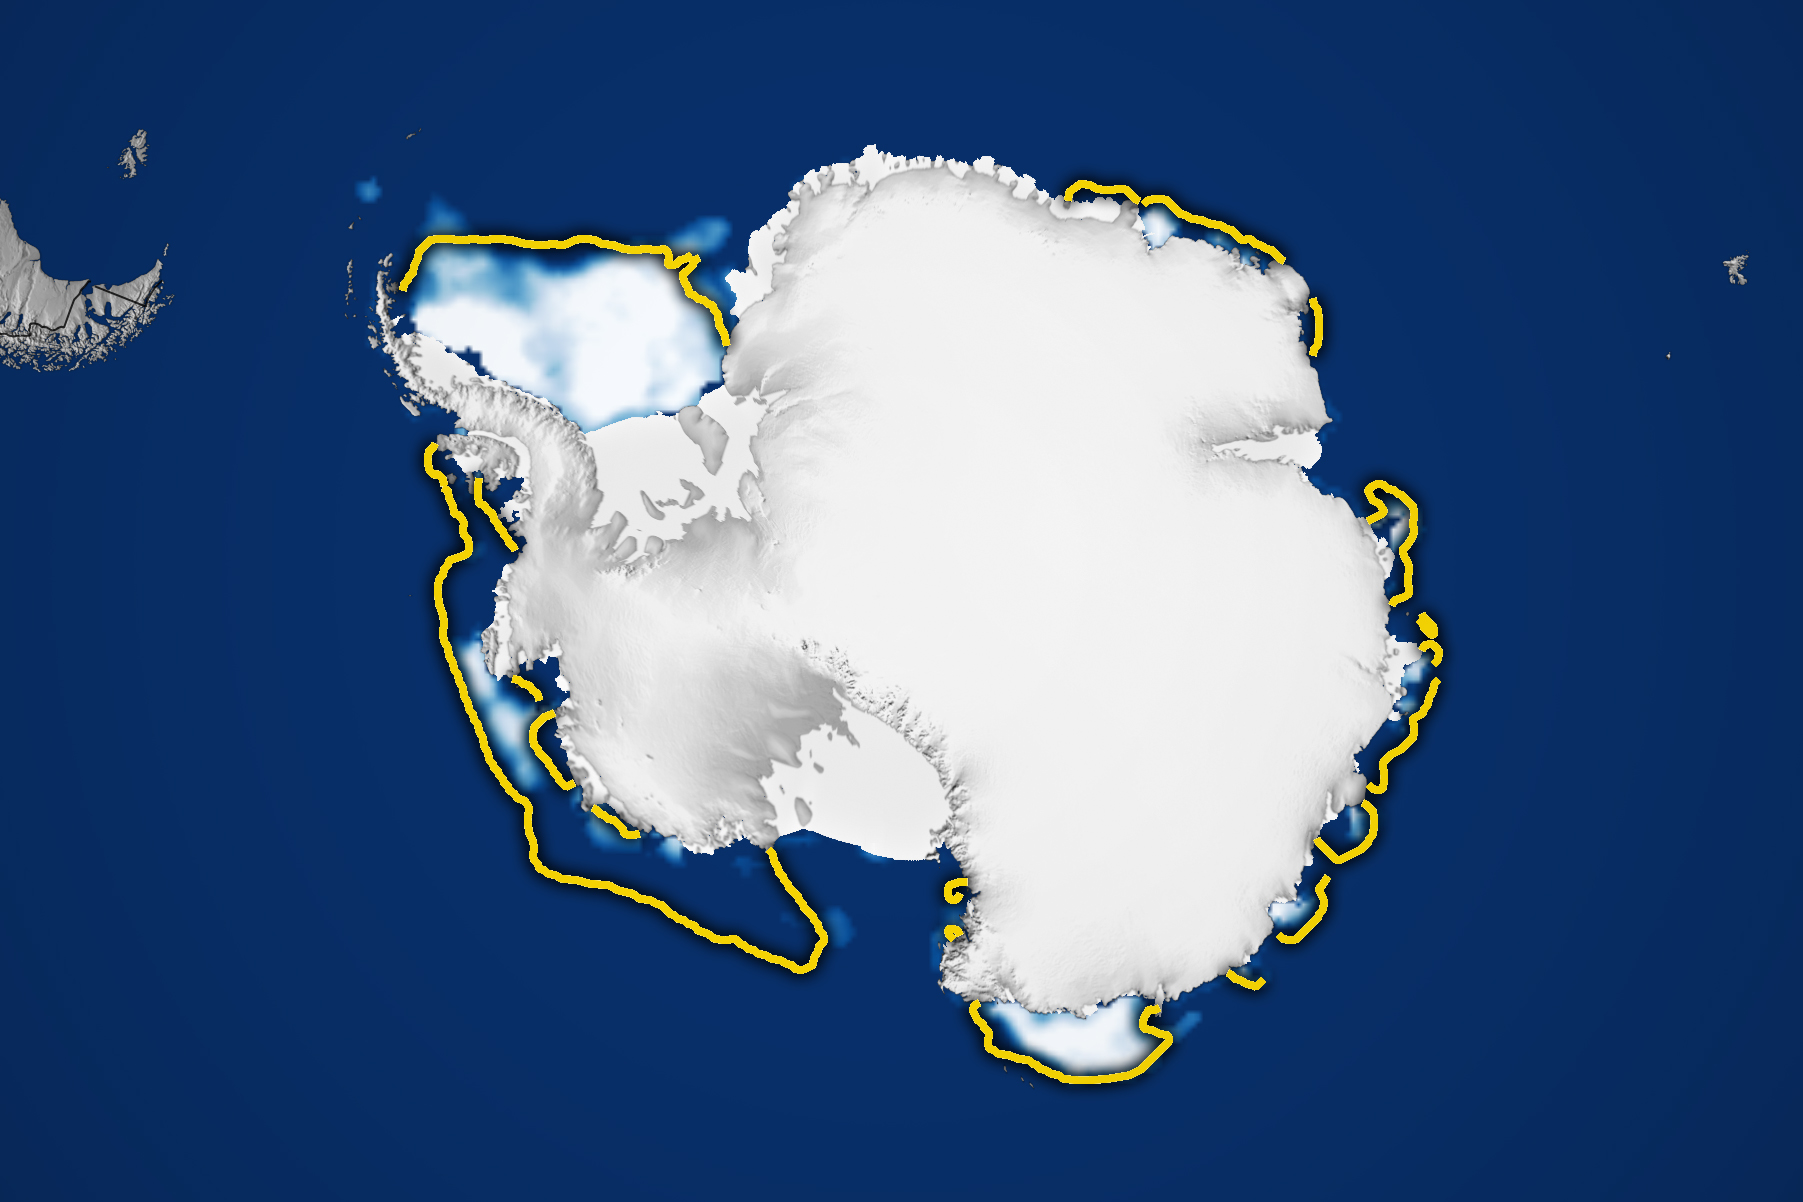 The area of Antarctic sea ice is close to the historical minimum